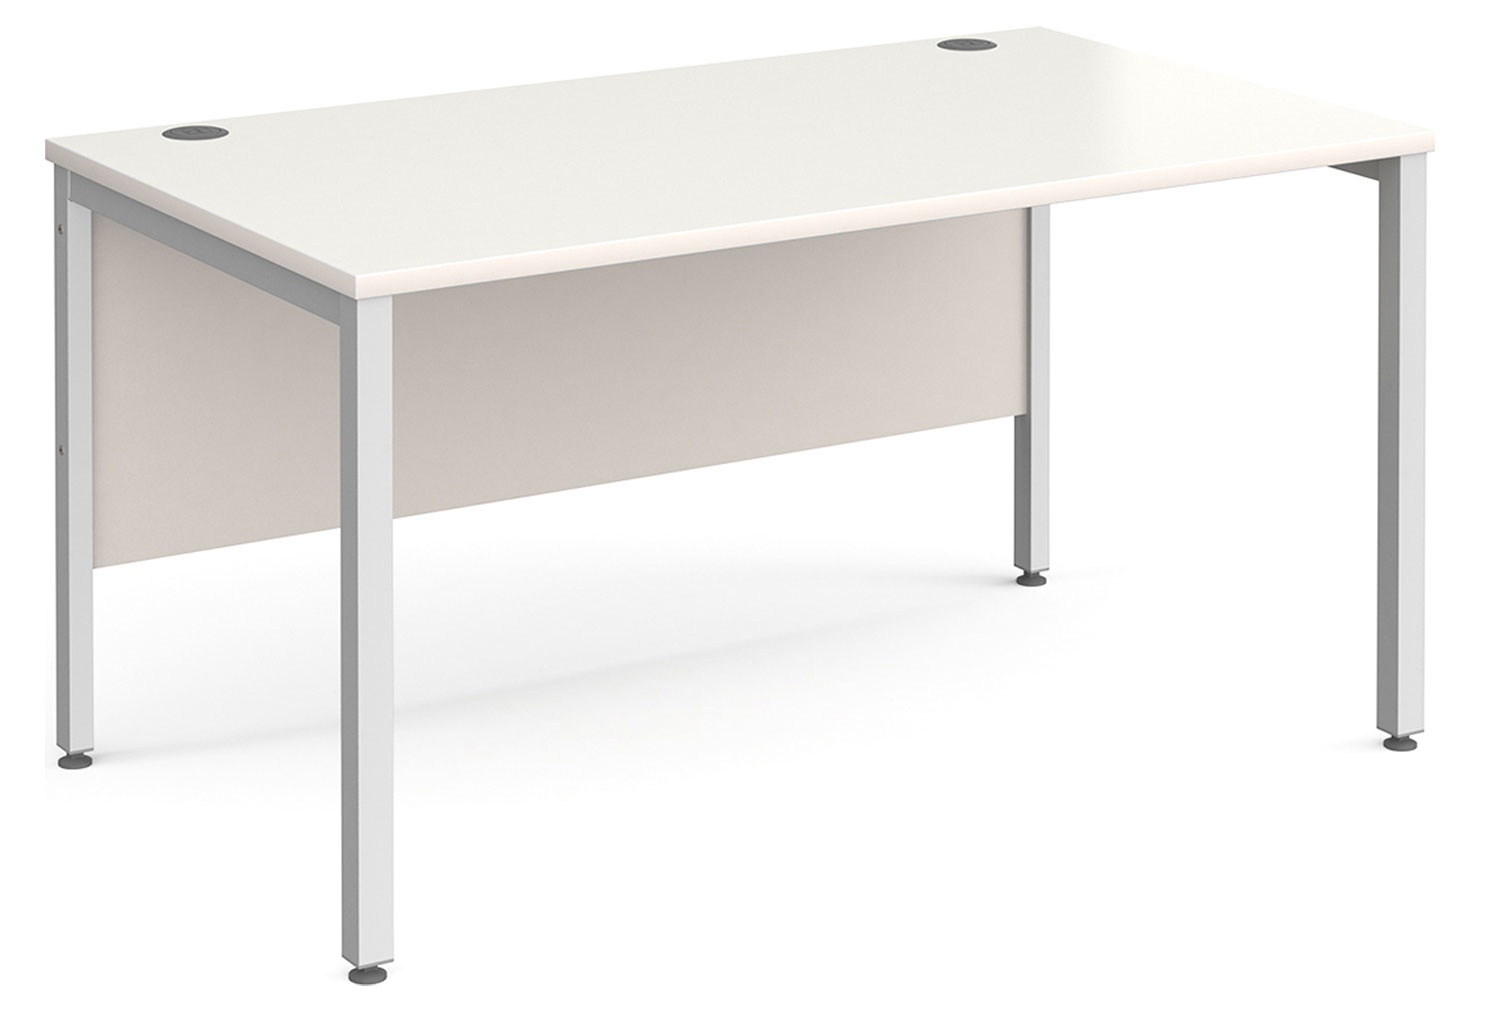 Tully Bench Rectangular Office Desk 140wx80dx73h (cm), White, Express Delivery